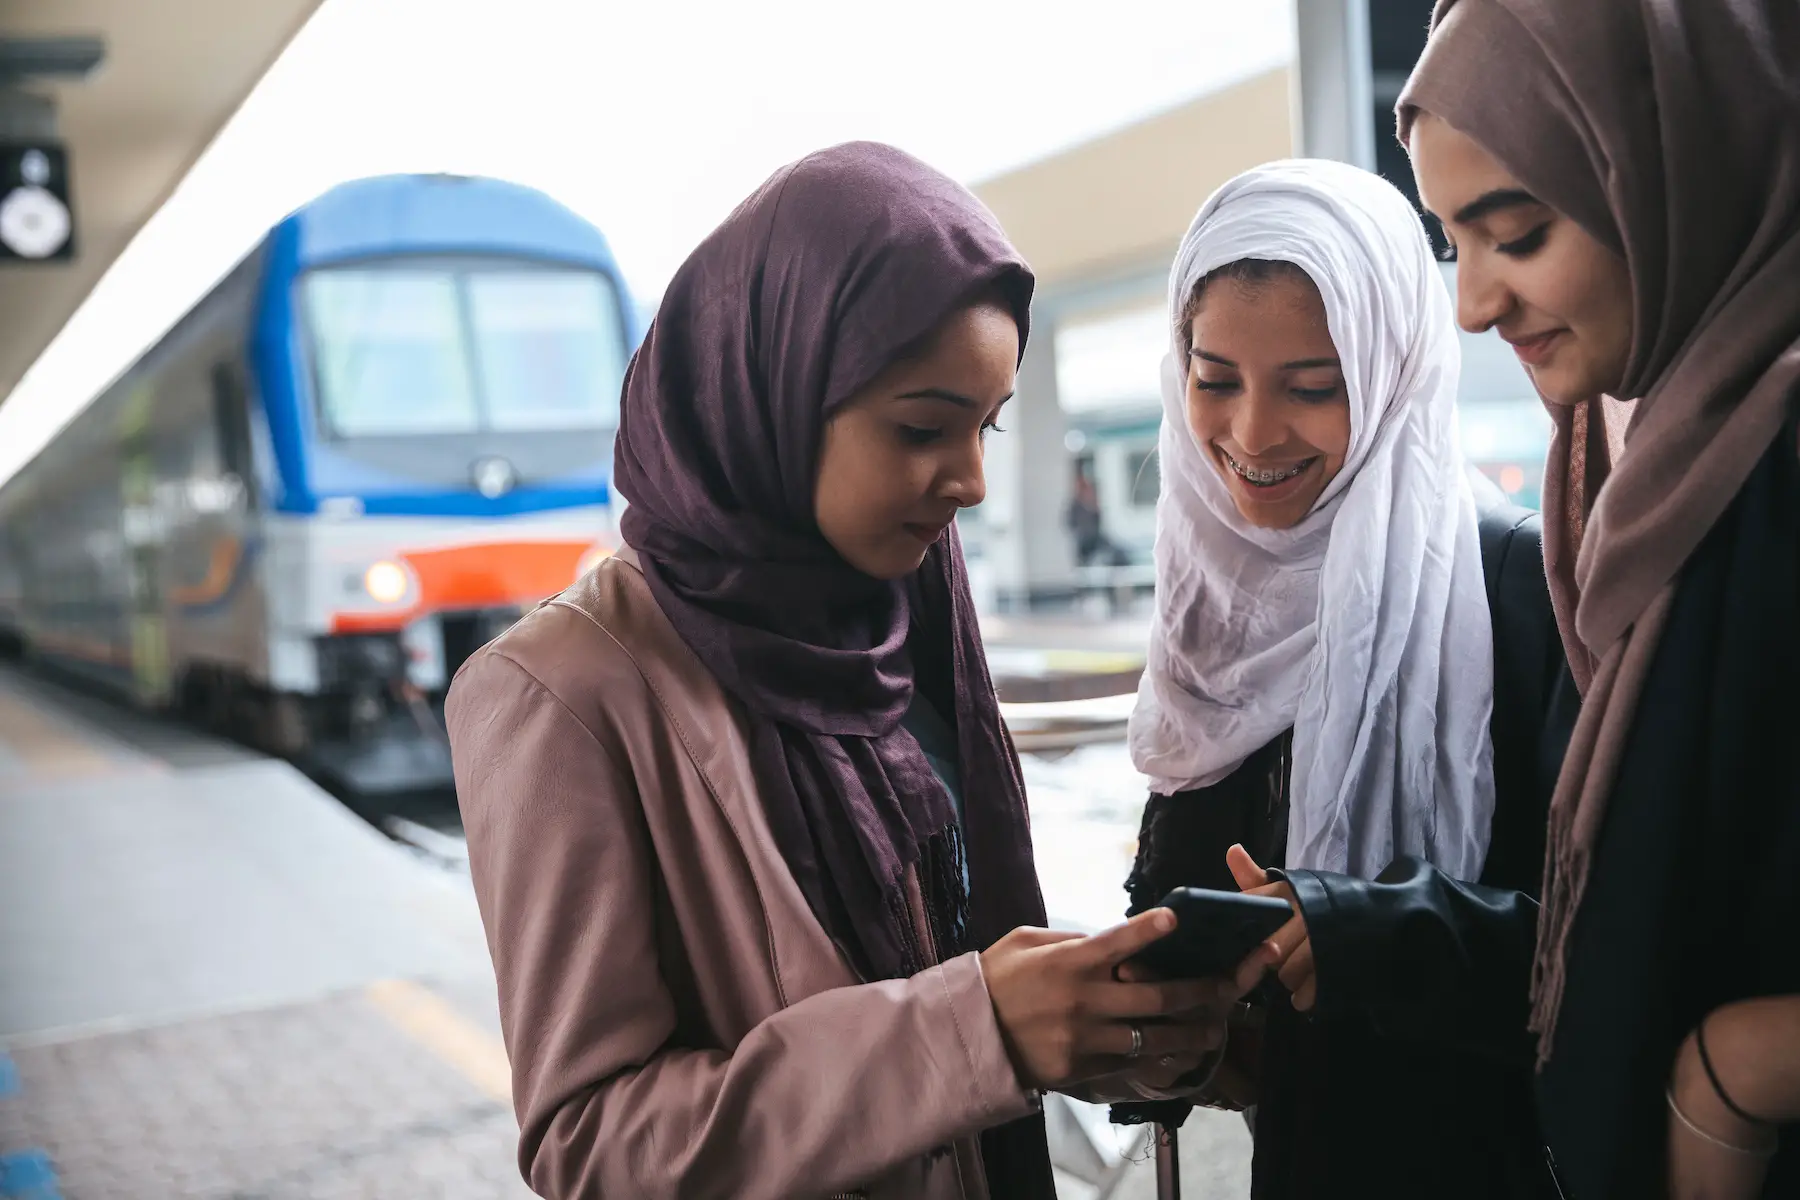 Three young women stand looking at a phone while waiting for the train on the platform